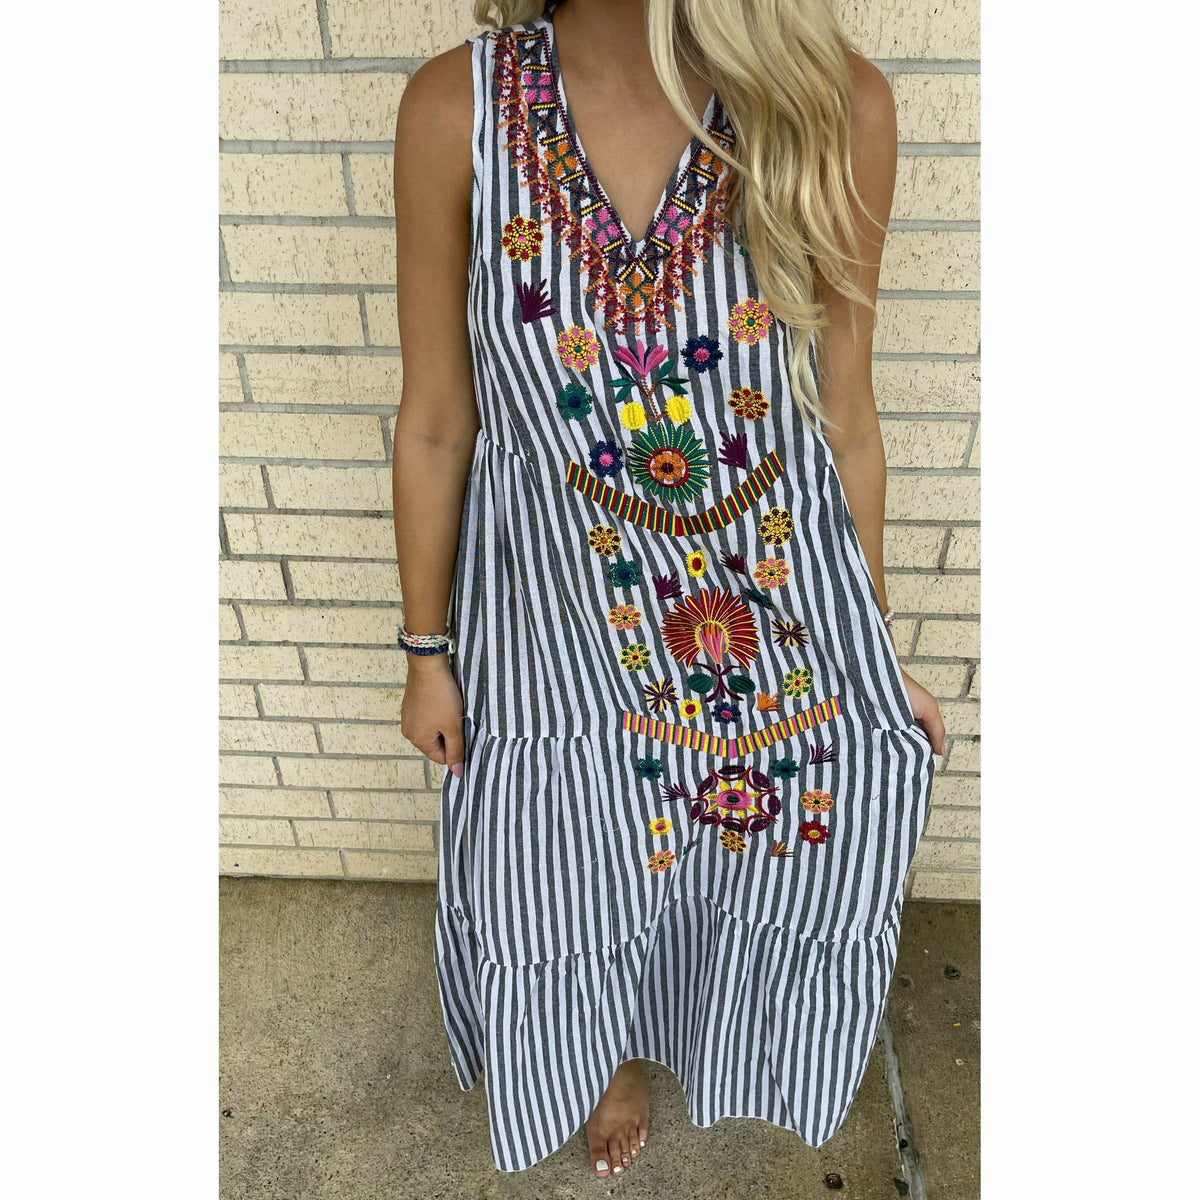 Floral Embroidered Maxi Dress